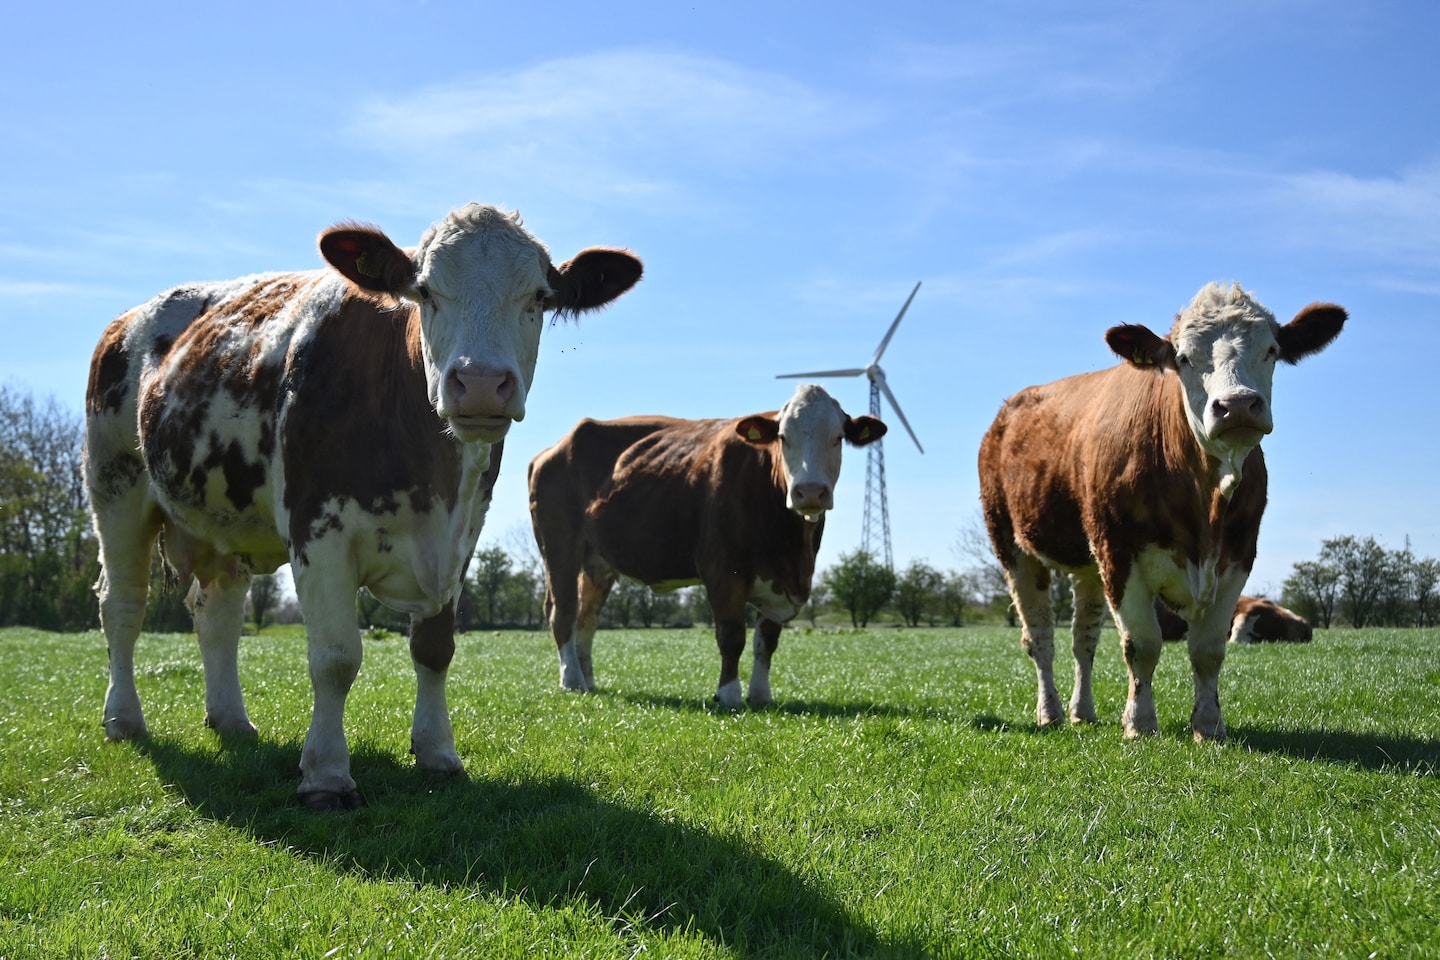 Denmark set to impose world’s first carbon tax on gassy cows